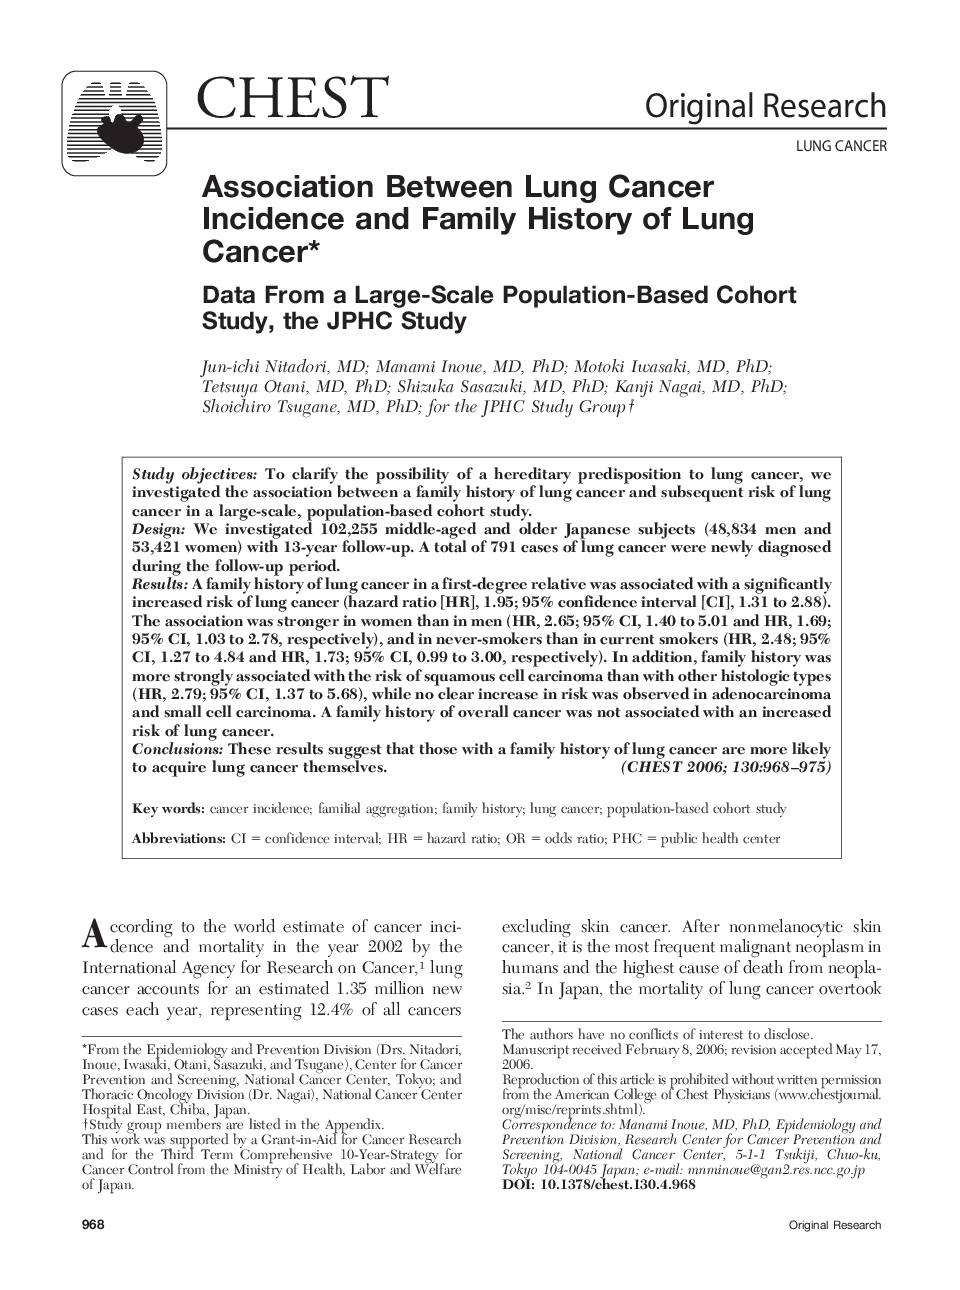 Association Between Lung Cancer Incidence and Family History of Lung Cancer